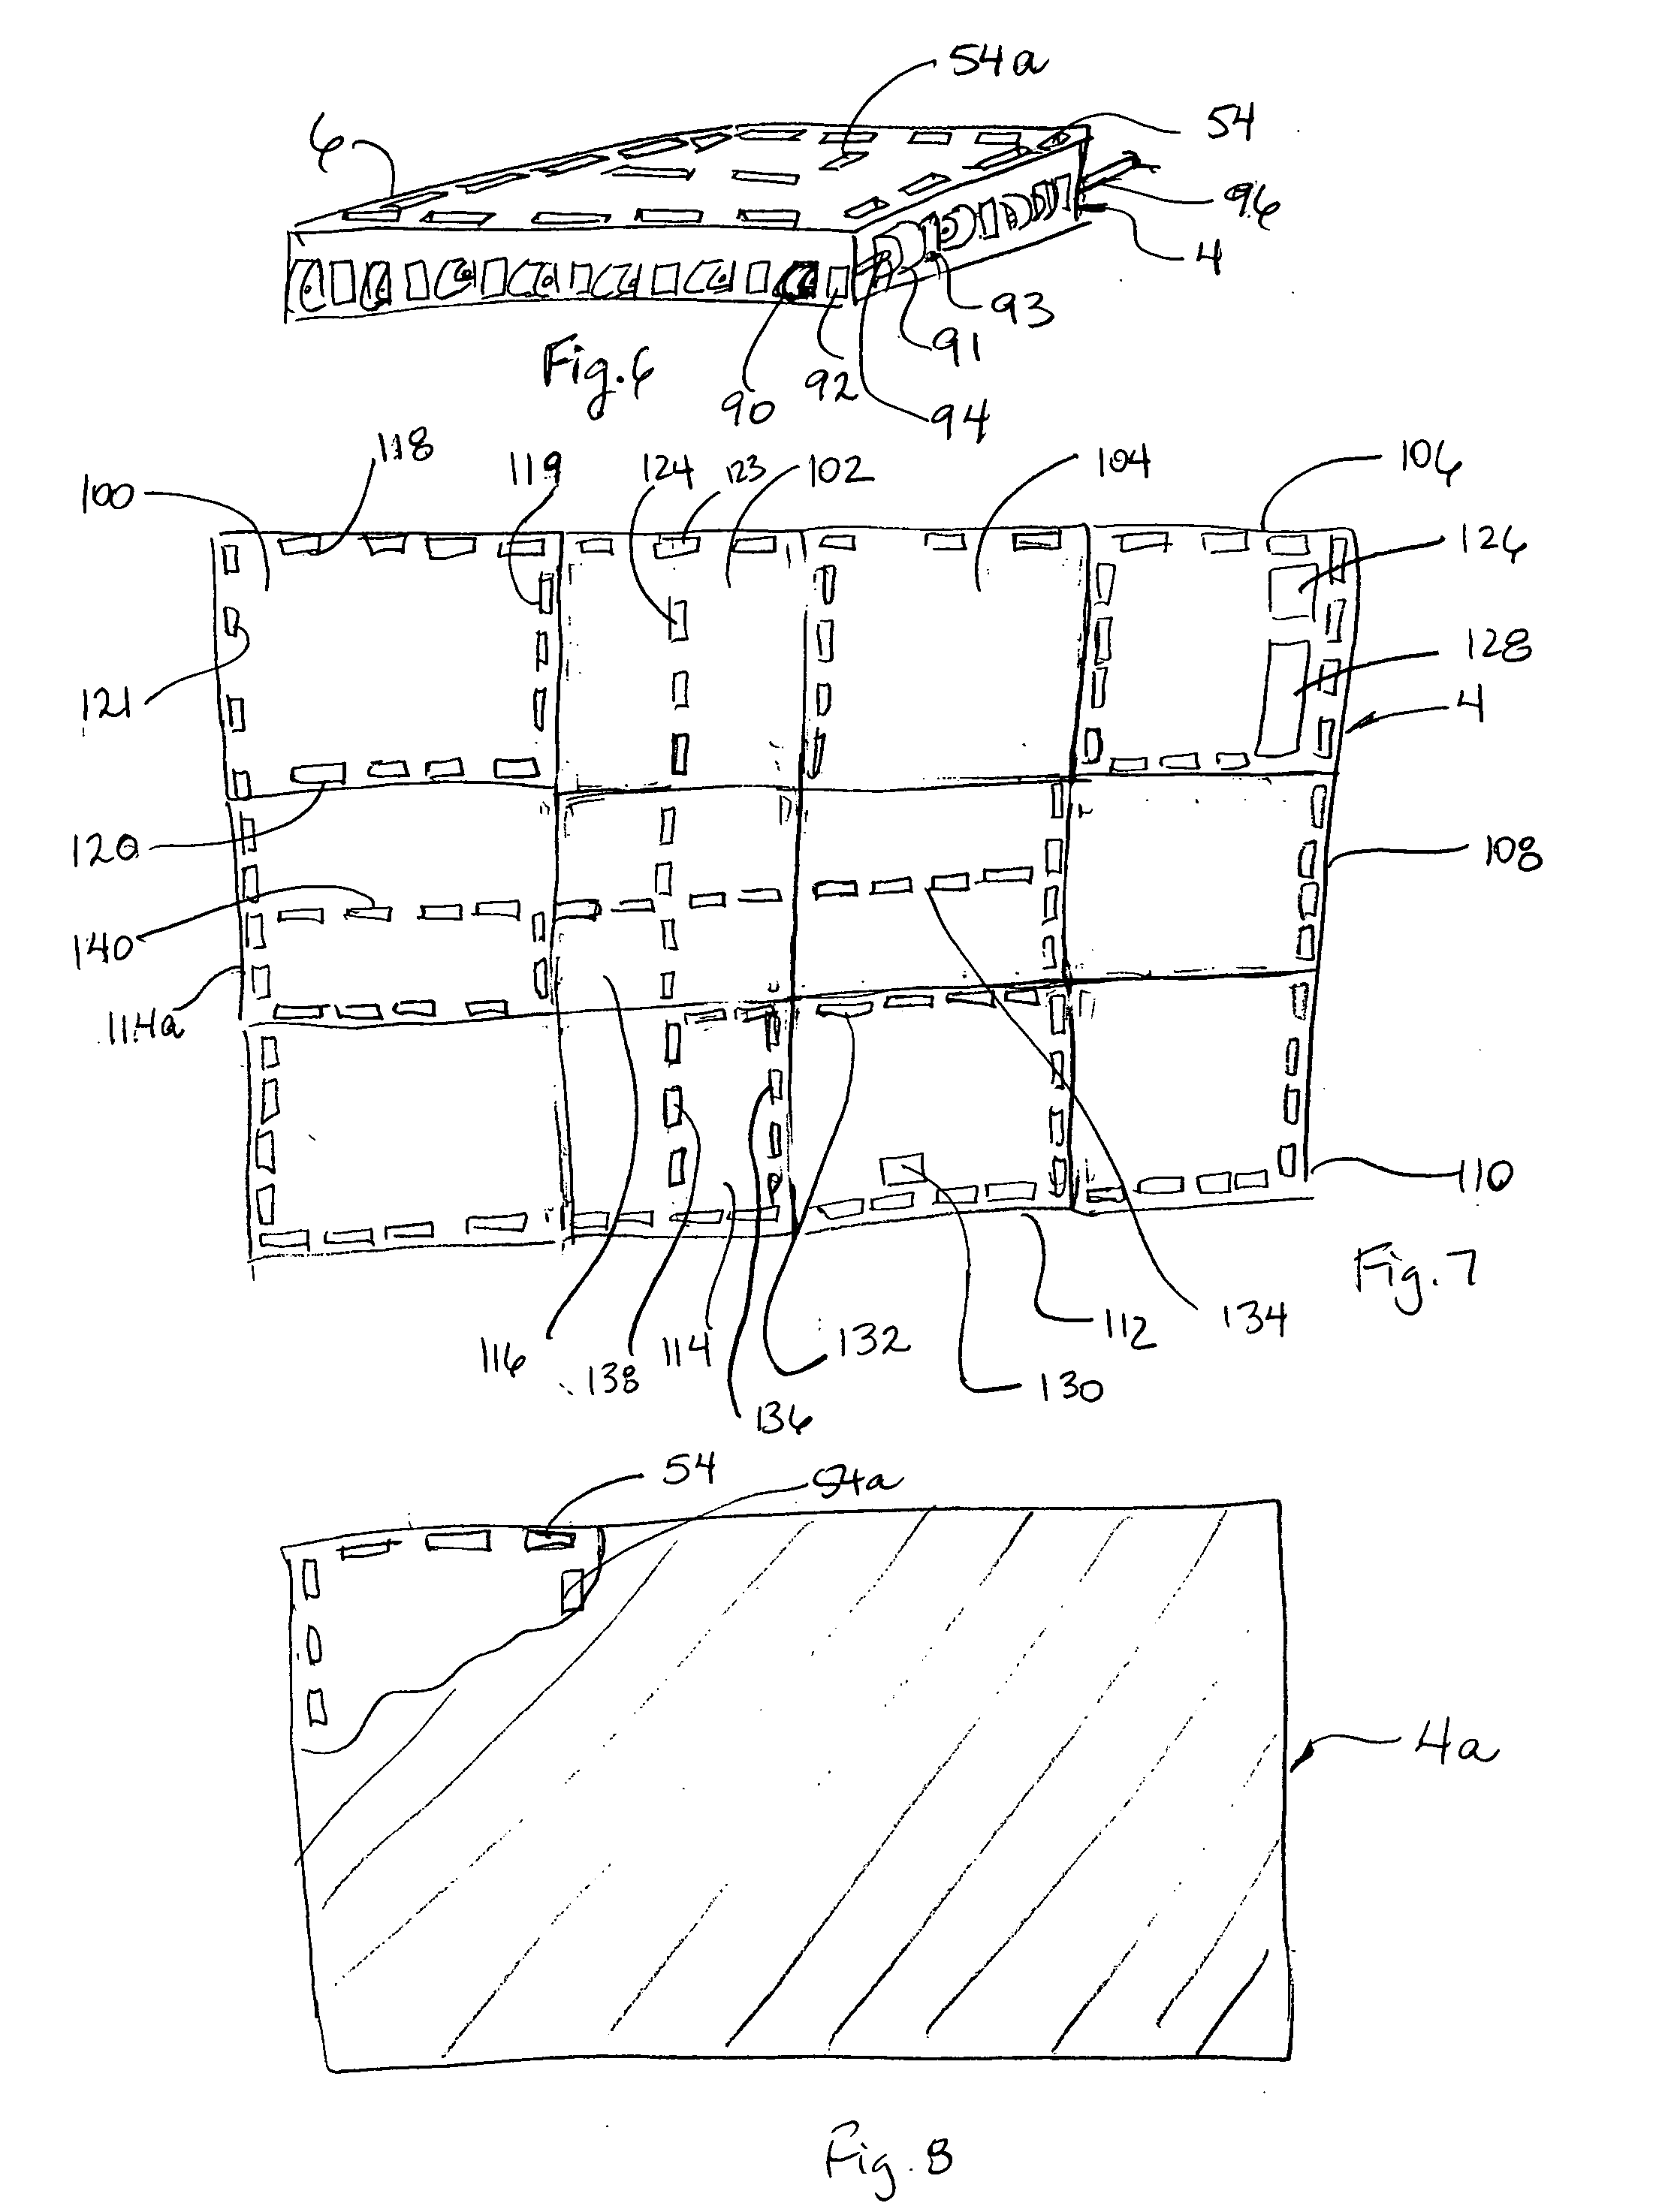 Construction module system and method